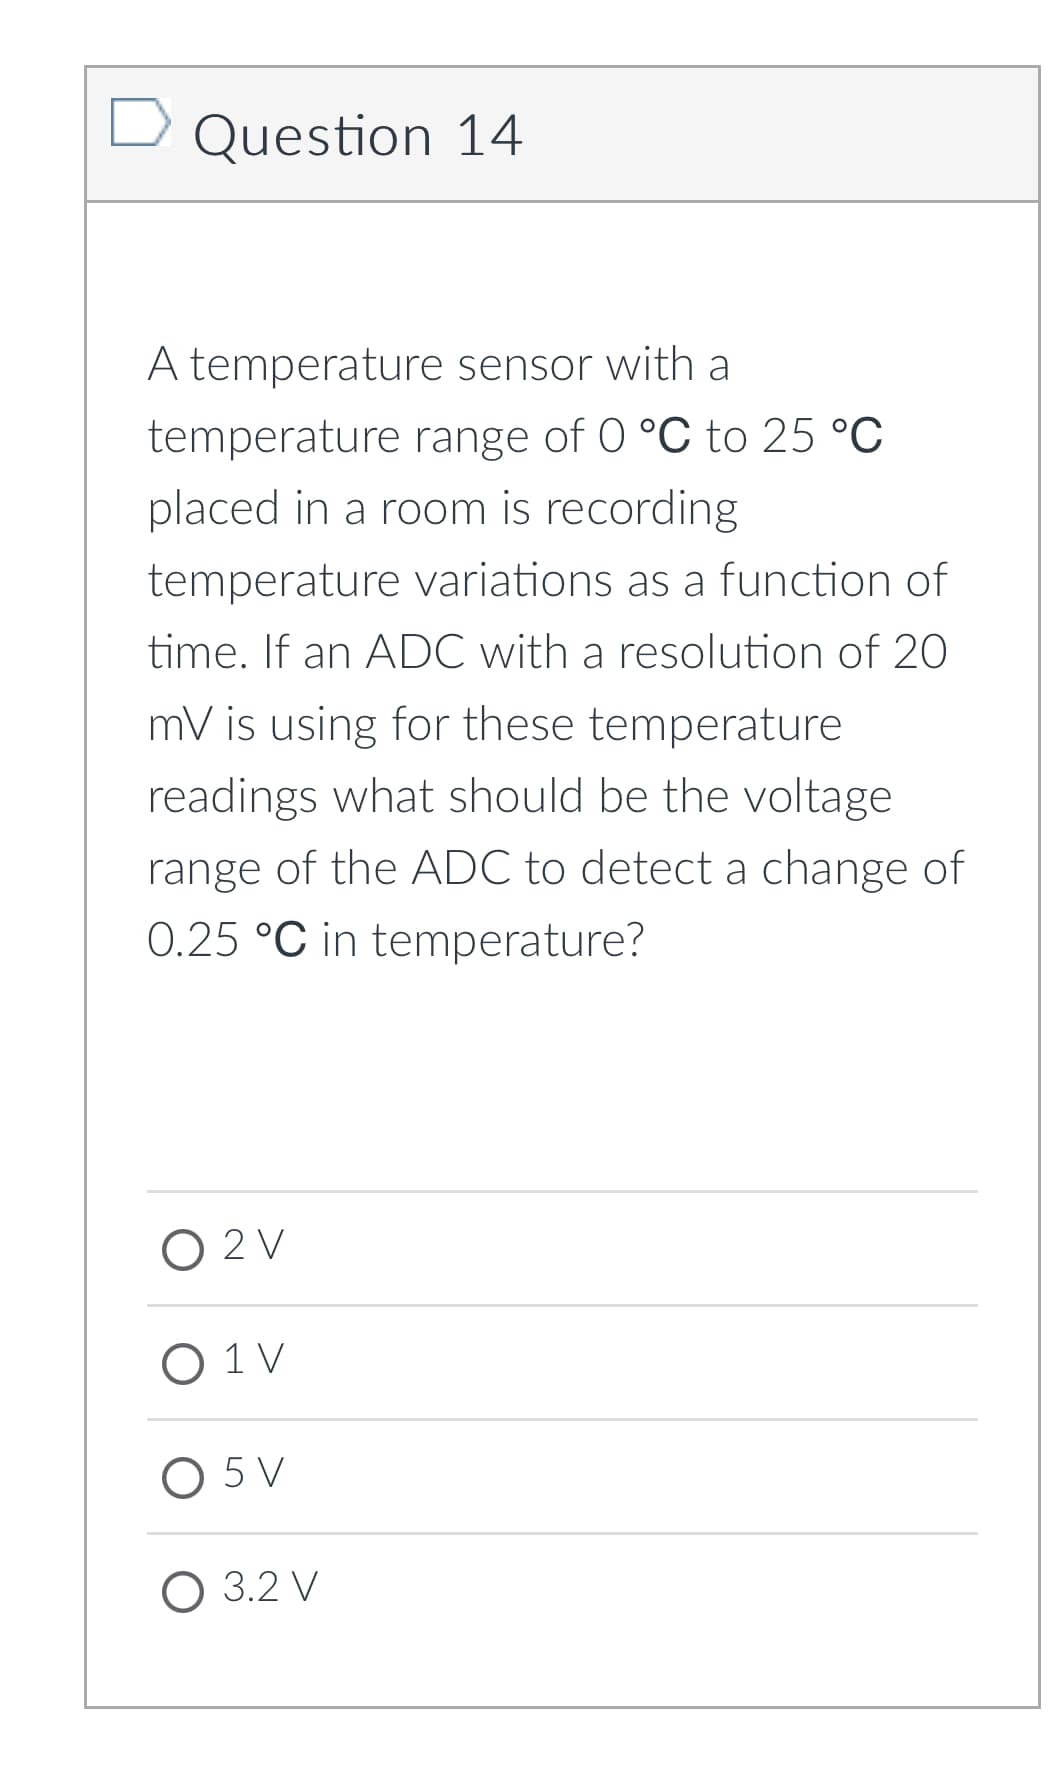 Question 14
A temperature sensor with a
temperature range of 0 °C to 25 °C
placed in a room is recording
temperature variations as a function of
time. If an ADC with a resolution of 20
mV is using for these temperature
readings what should be the voltage
range of the ADC to detect a change of
0.25 °C in temperature?
O 2 V
O 1 V
O 5 V
О 3.2 V
